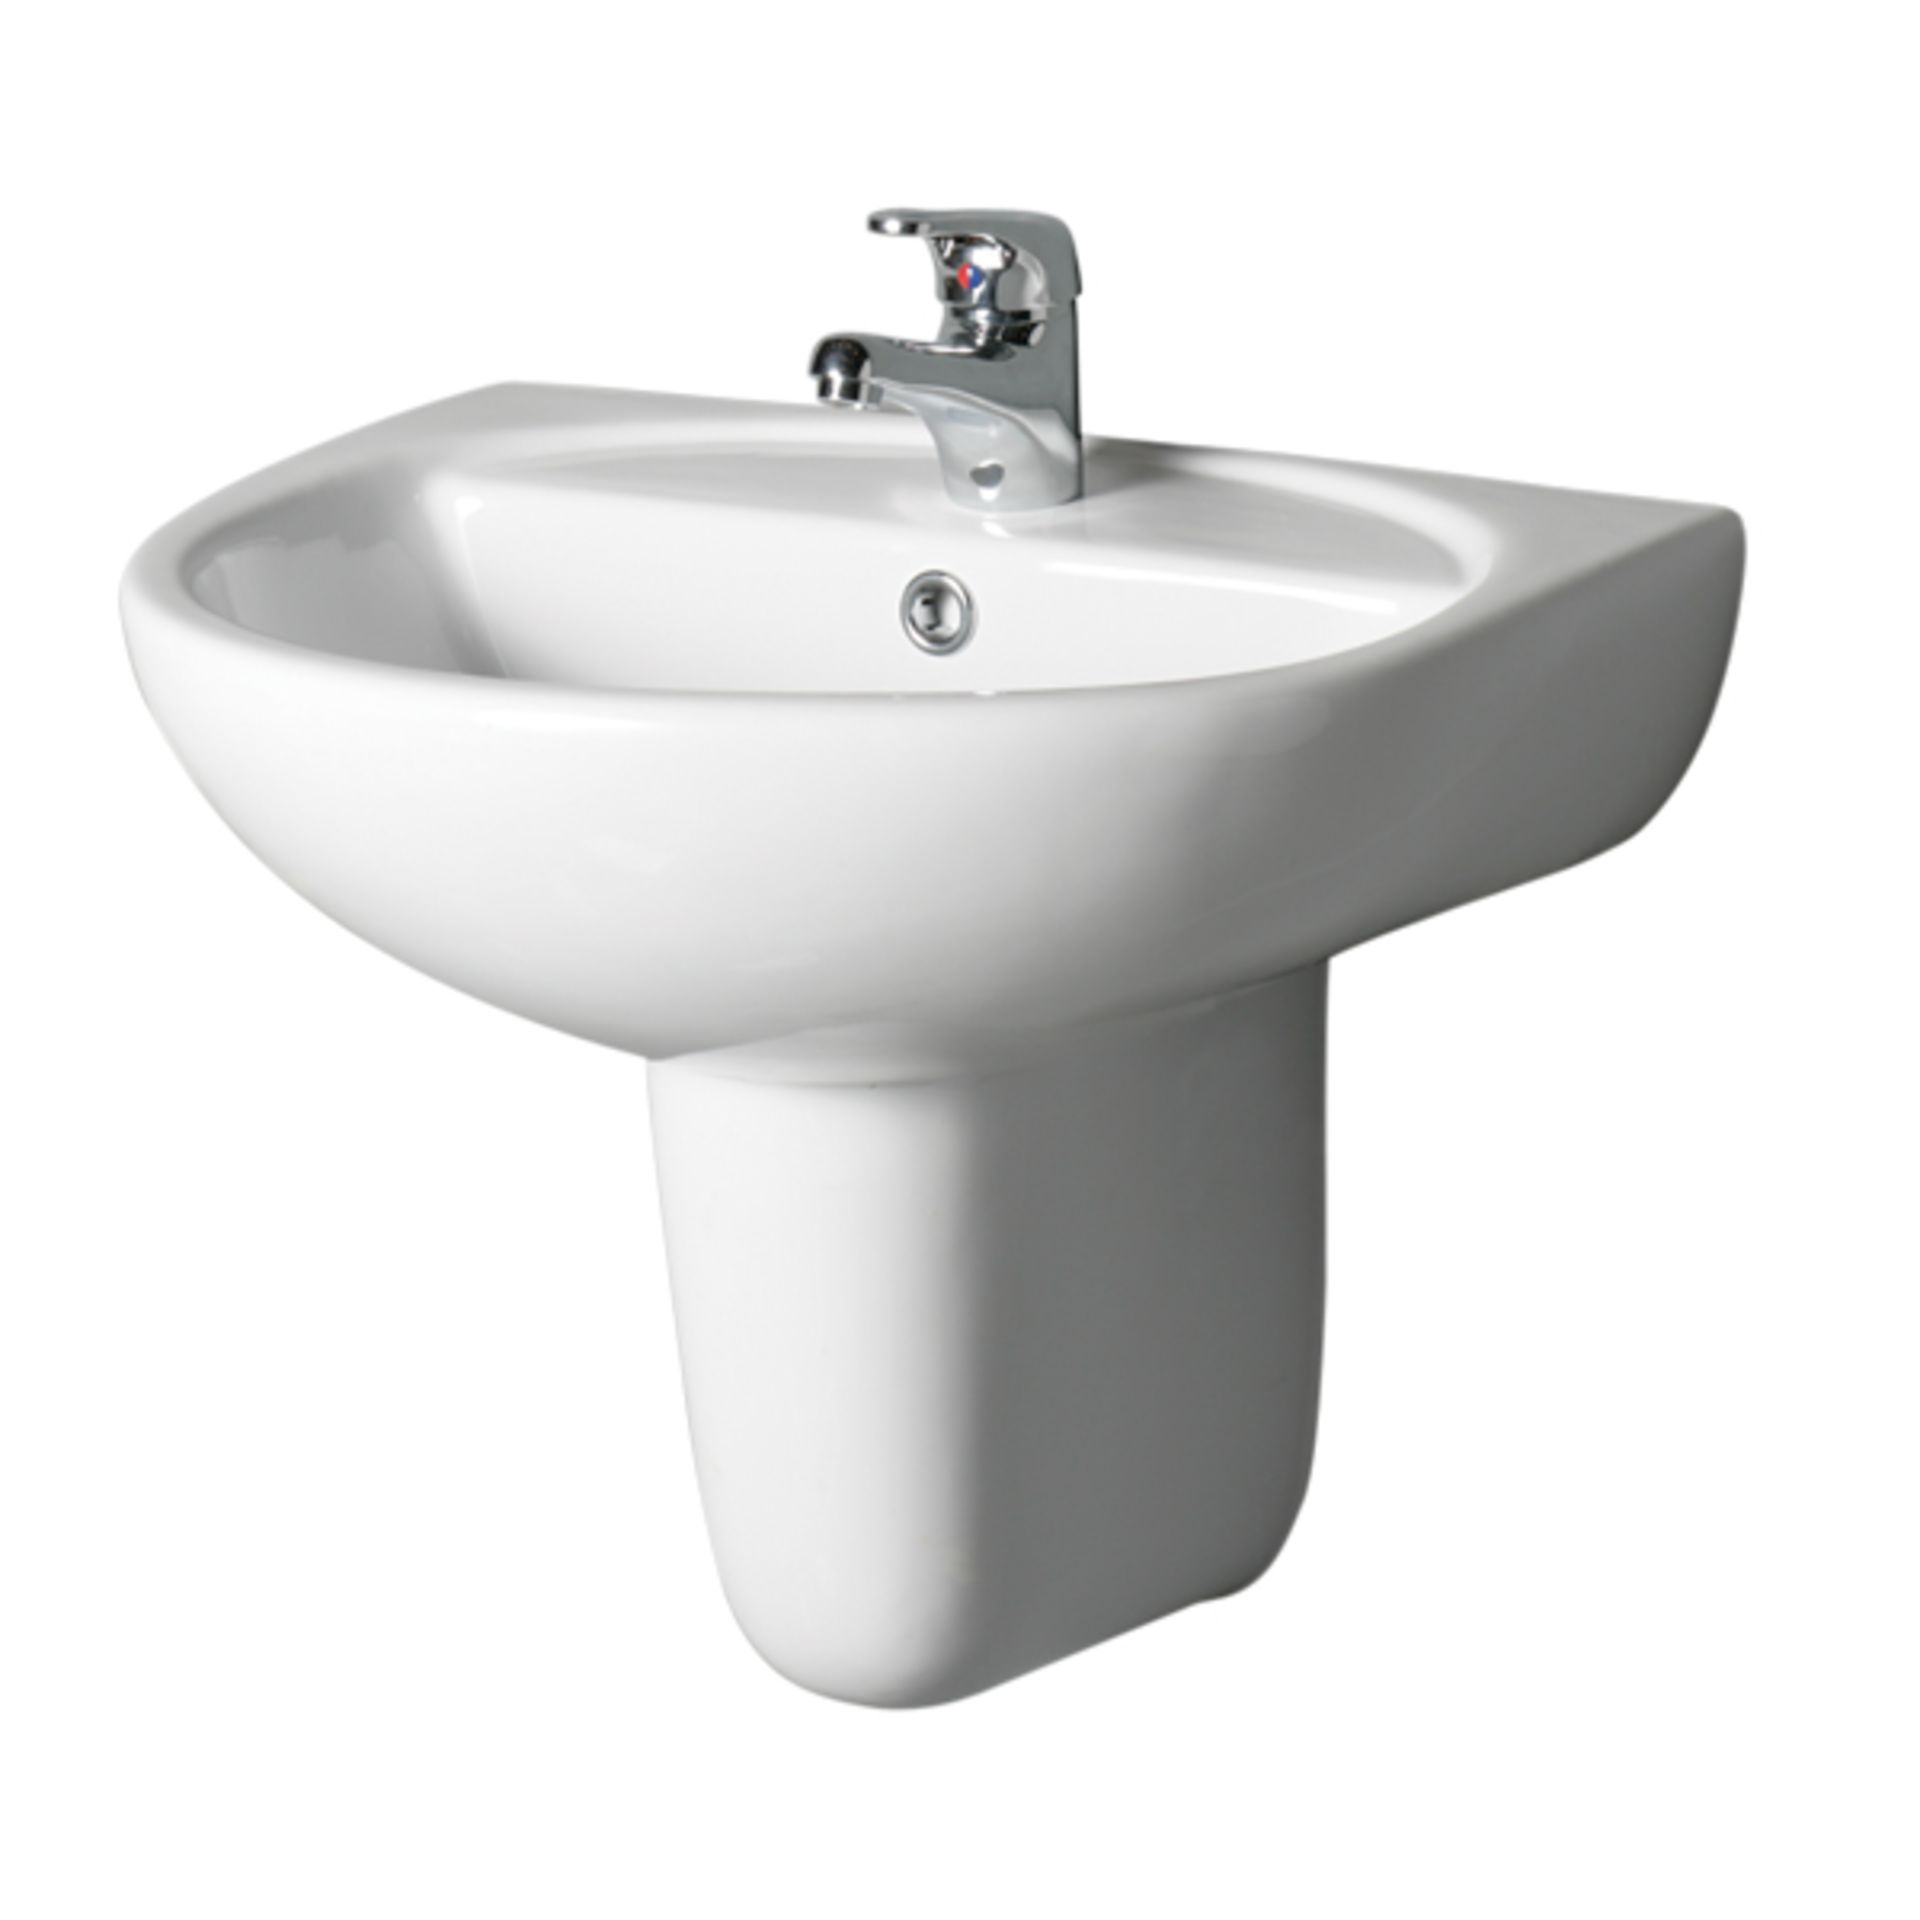 1 BRAND NEW BOXED TRADITIONAL CONTEMPORARY BATHROOMS LARGE EXPRESS BASIN IN WHITE